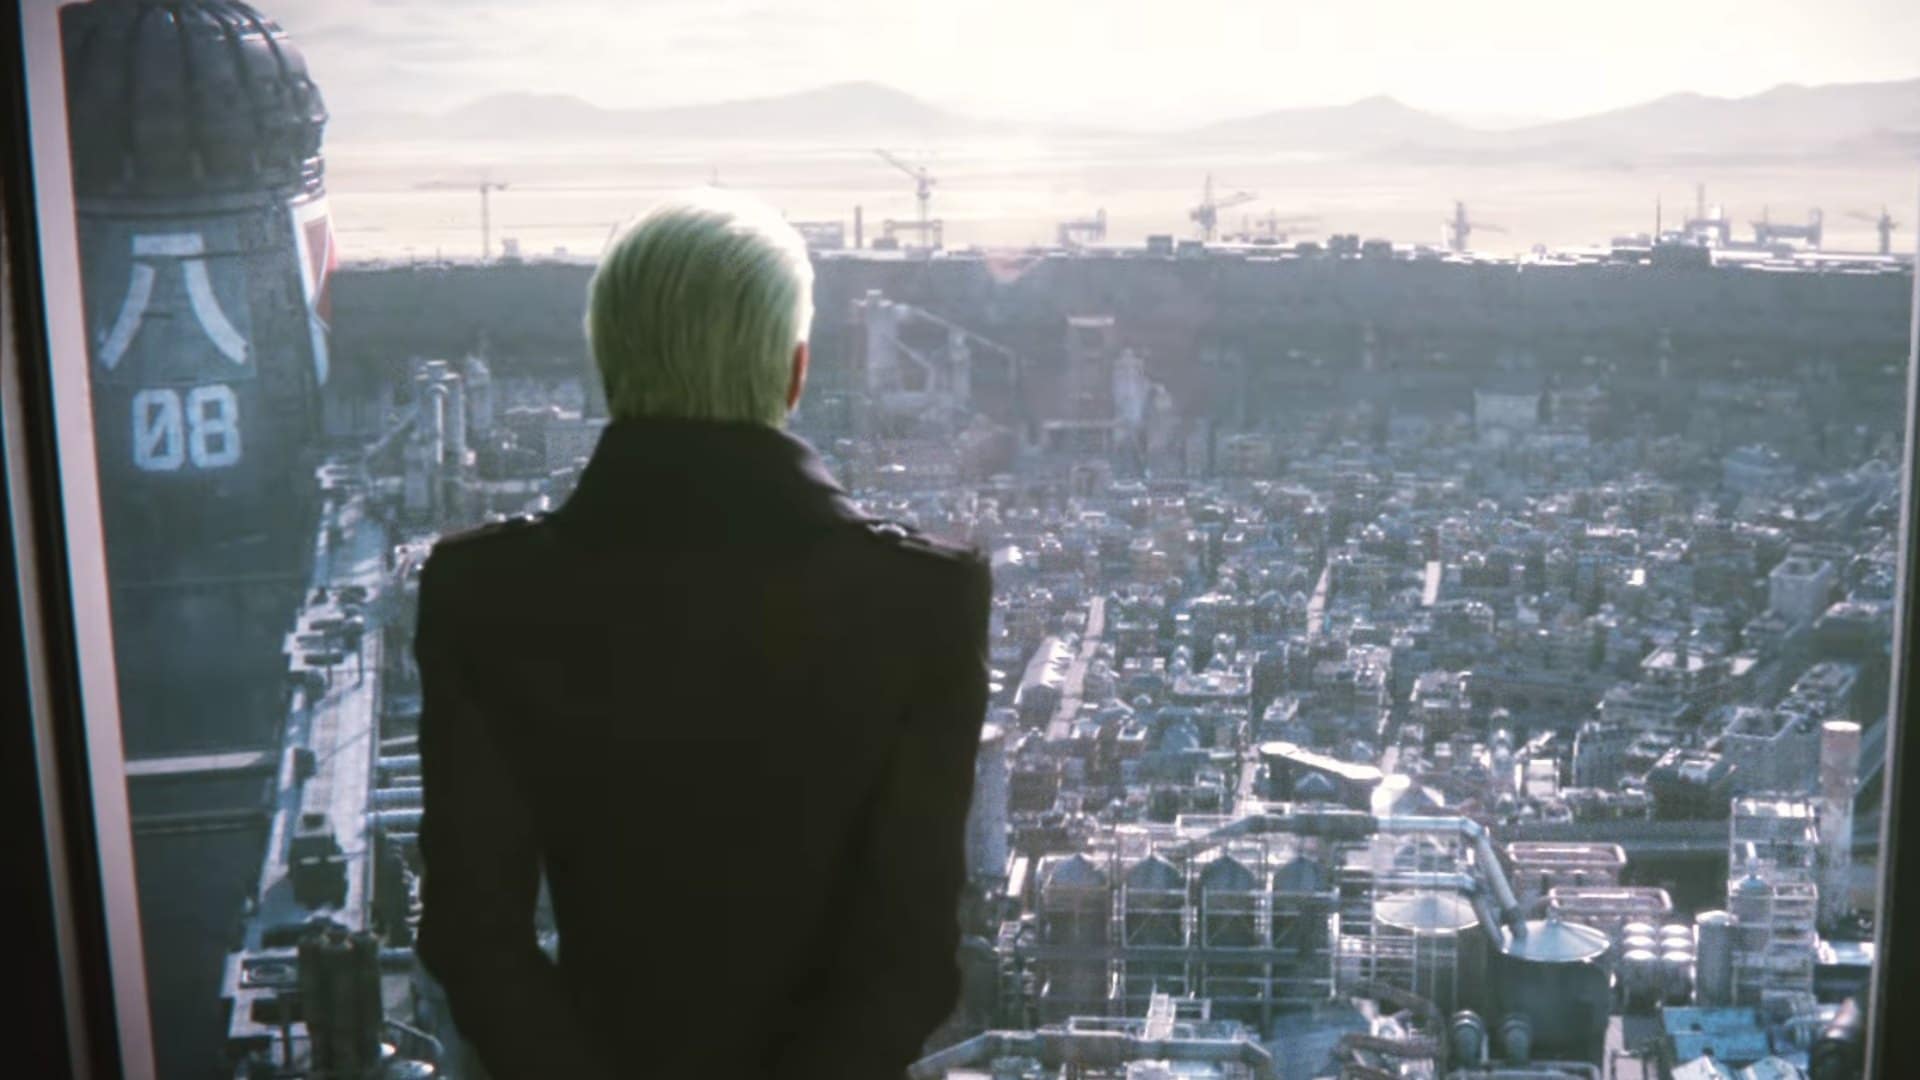 Final Fantasy VII The First Soldier Releases Gameplay Trailer at Tokyo Game Show 2021